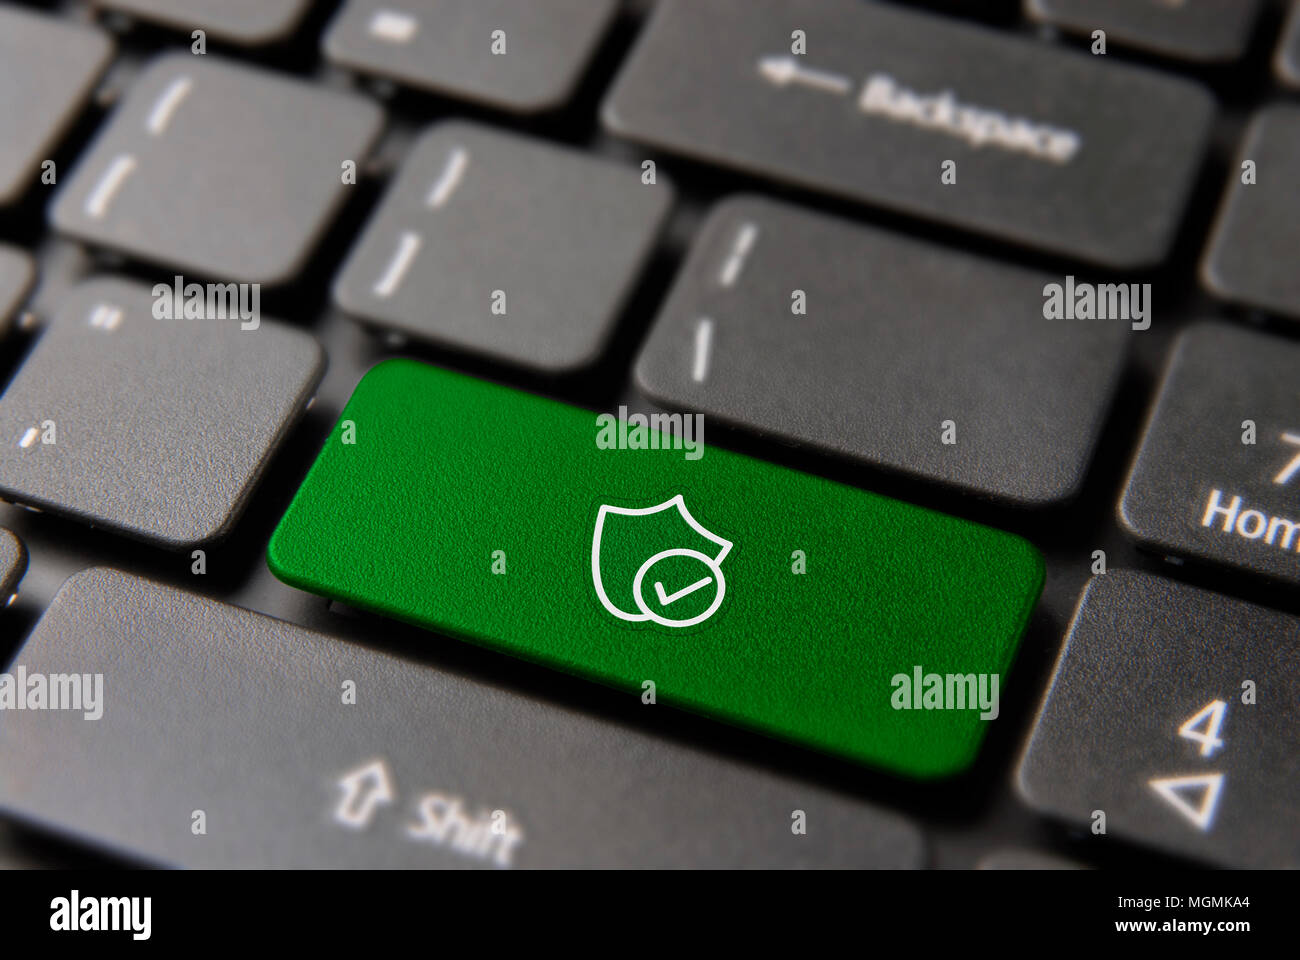 Business cyber security computer button for internet safety concept. Shield protection icon key in green color. Stock Photo